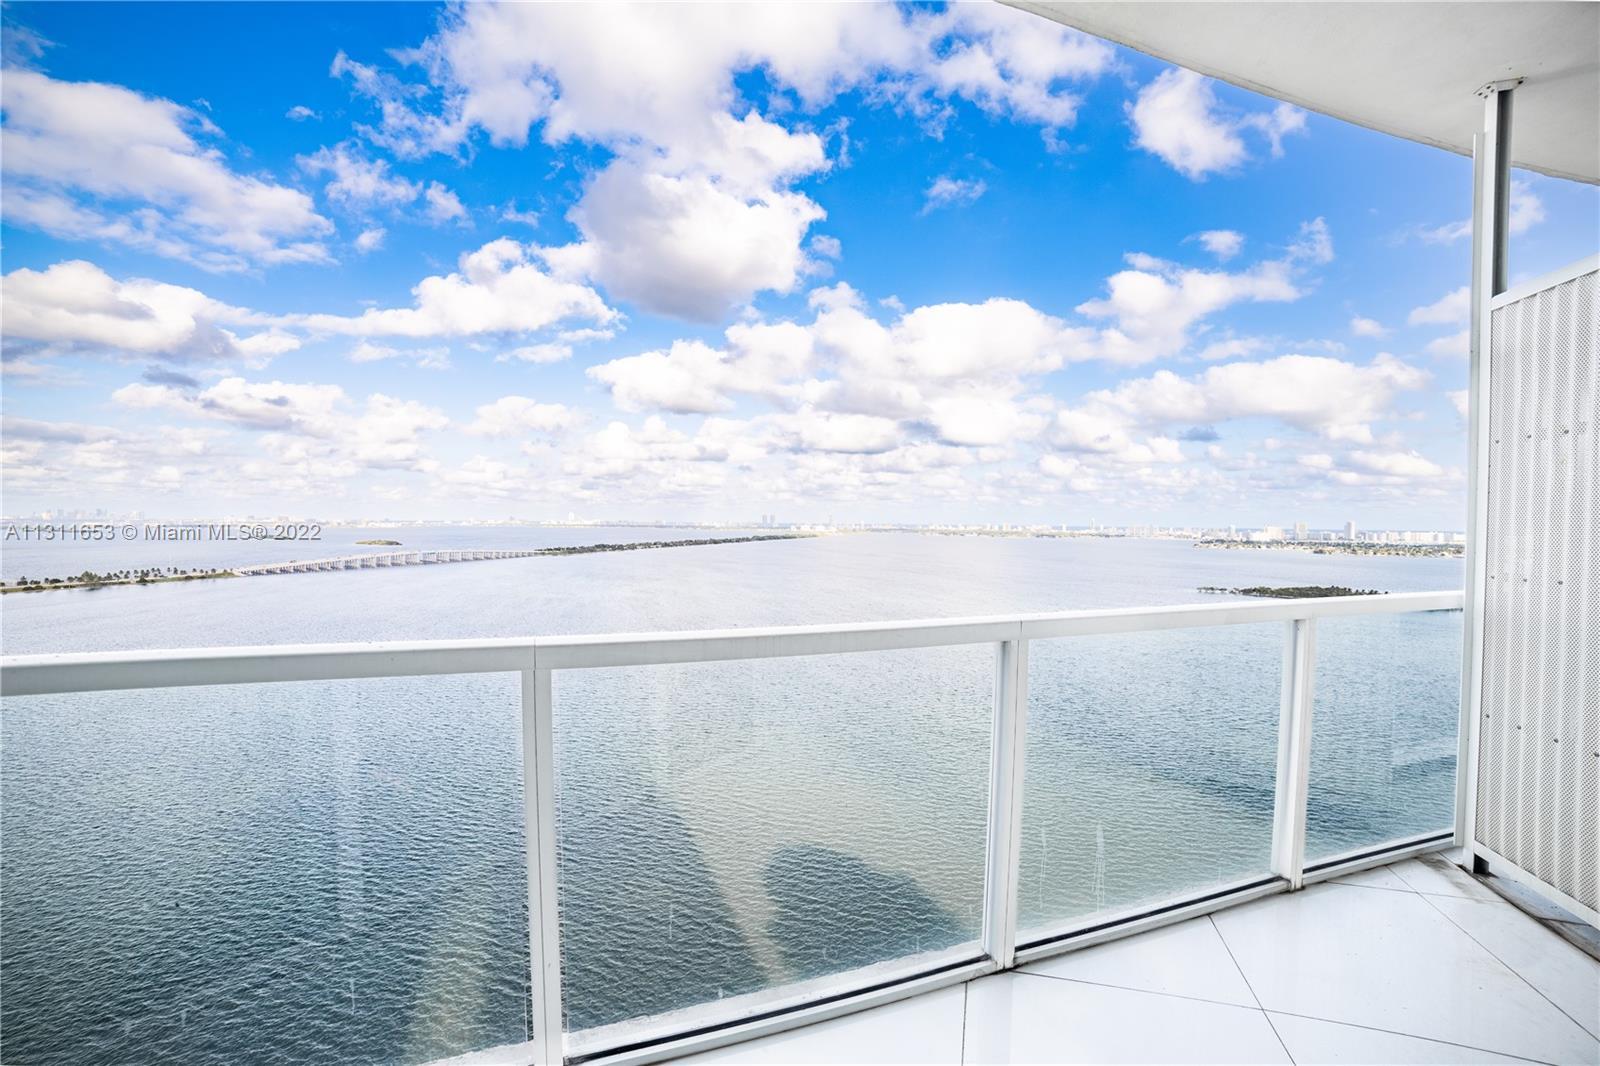 Endless water views from this  BREATHTAKING Penthouse at the Onyx,  located in one of Miami's hottes